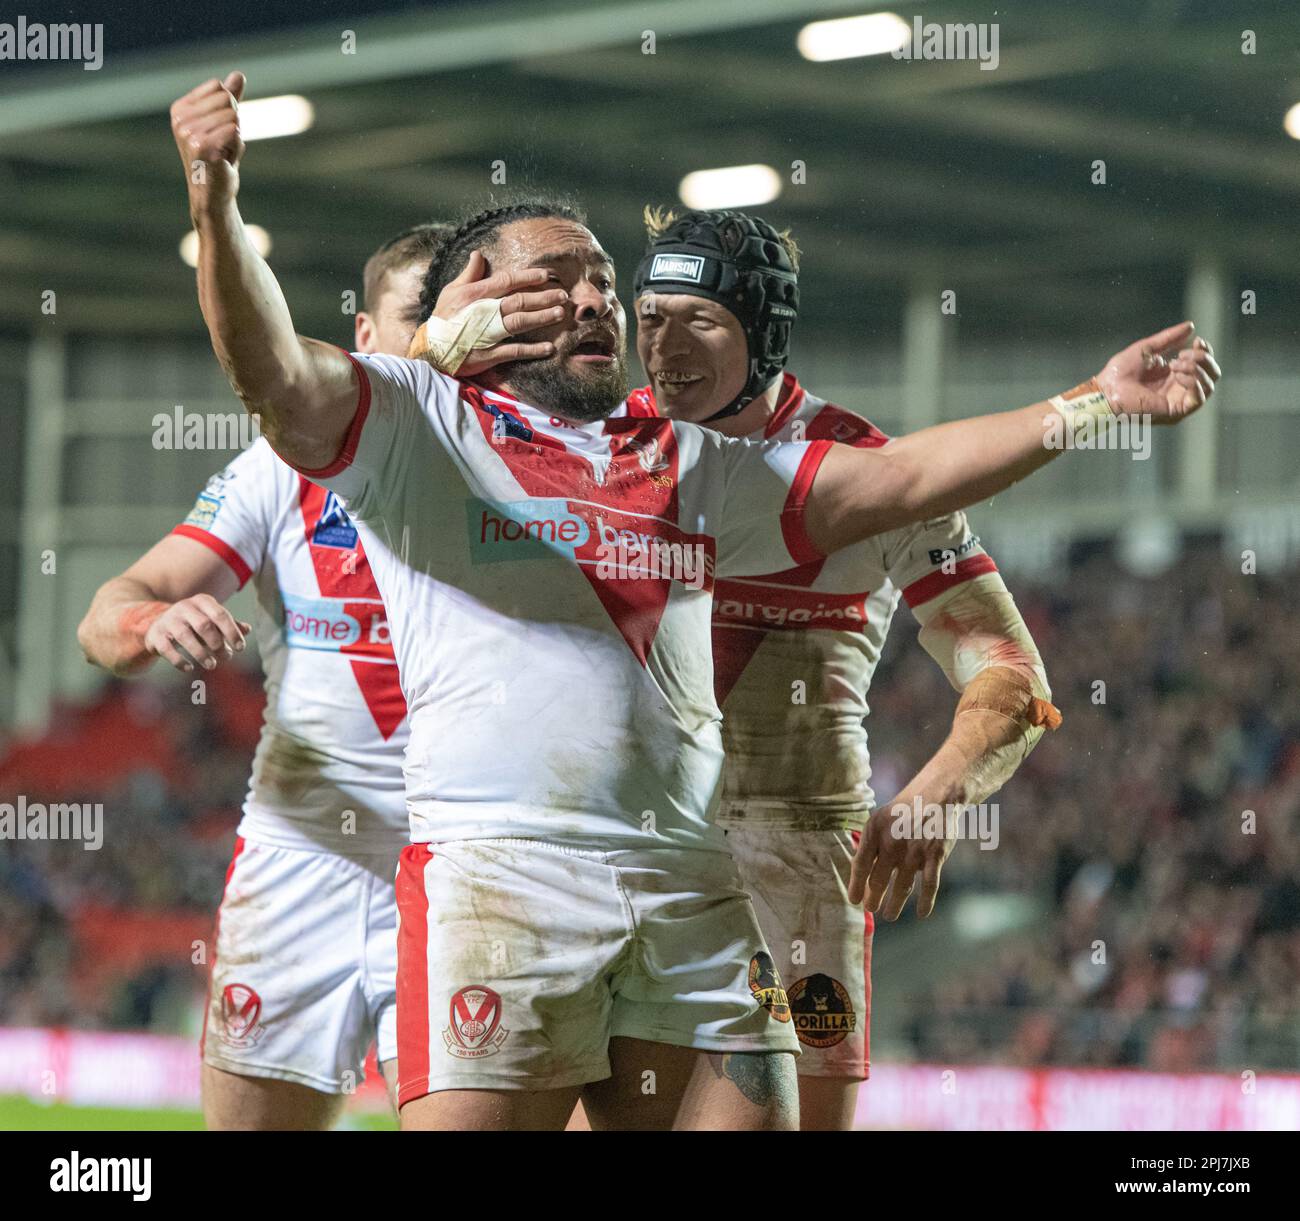 St Helens, Merseyside, England 31st March 2023. Konrad Hurrell celebrates his try during, St Helens Rugby Football Club V Wakefield Trinity Rugby League Football Club at the Totally Wicked Stadium, the Betfred Super League (Credit Image: ©Cody Froggatt/Alamy live news) Stock Photo